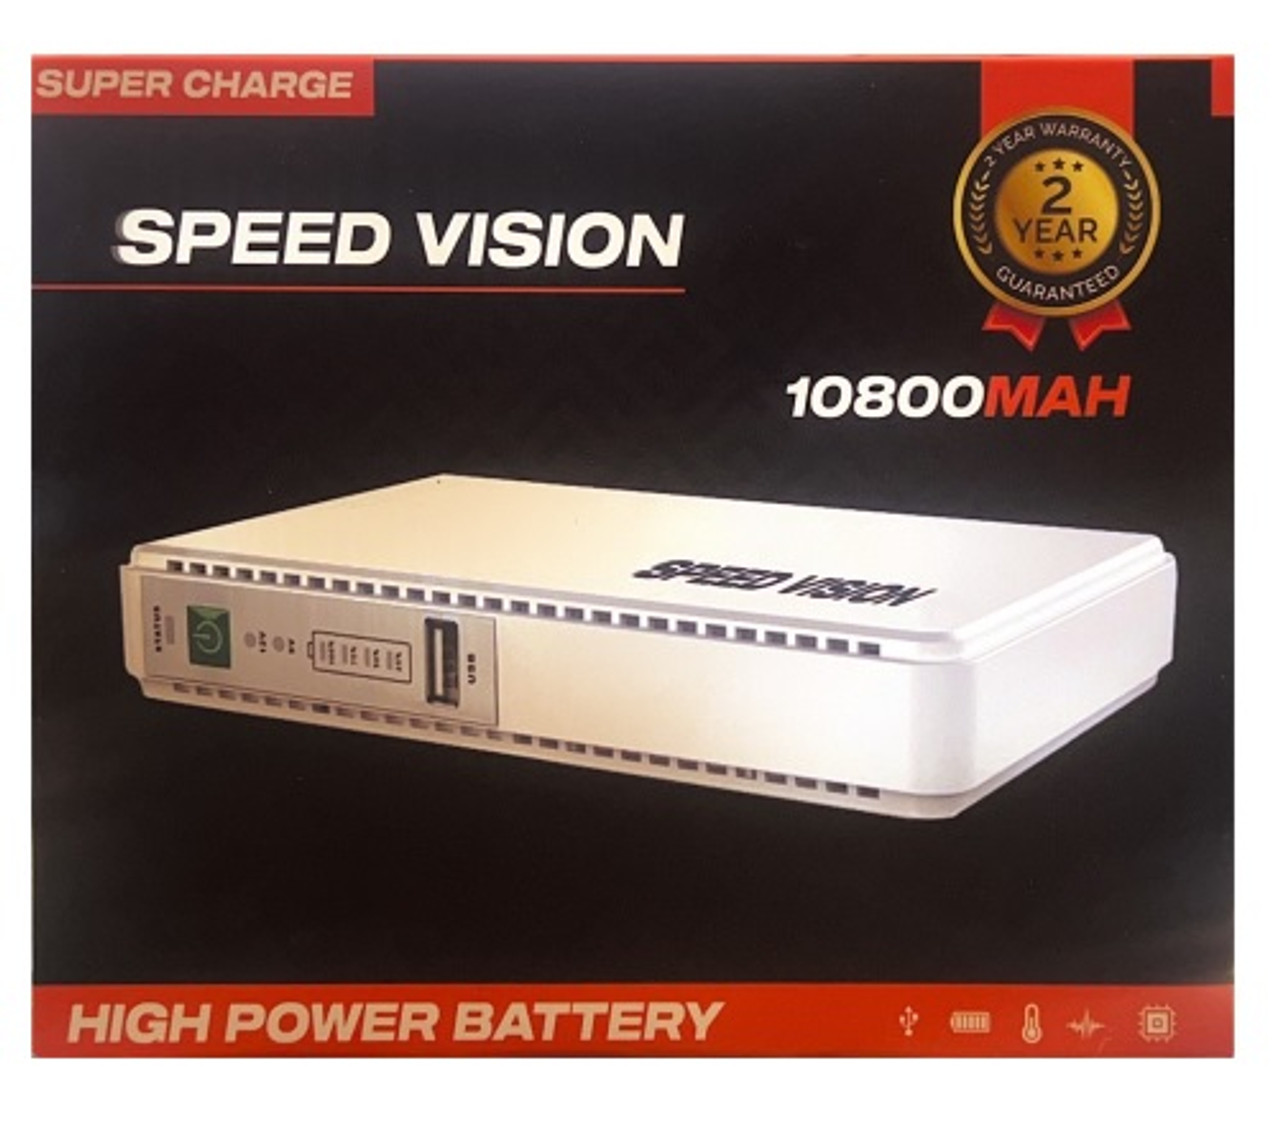 Speed Vision Mini Ups for Router 10800 5/9/12v + POE, AYOUB COMPUTERS